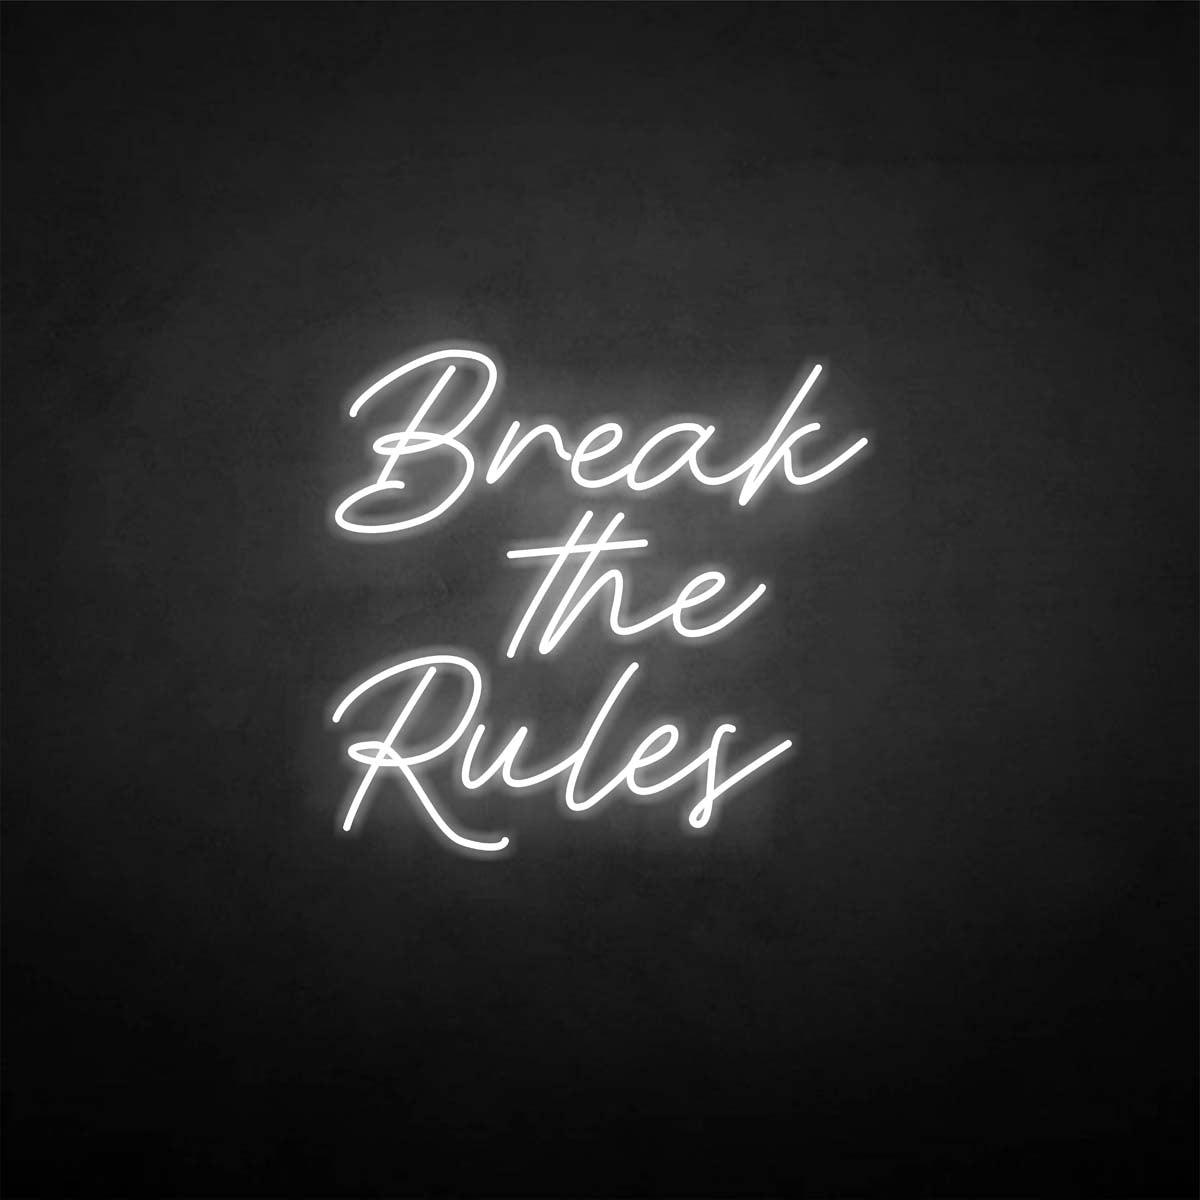 'Break the rules' neon sign